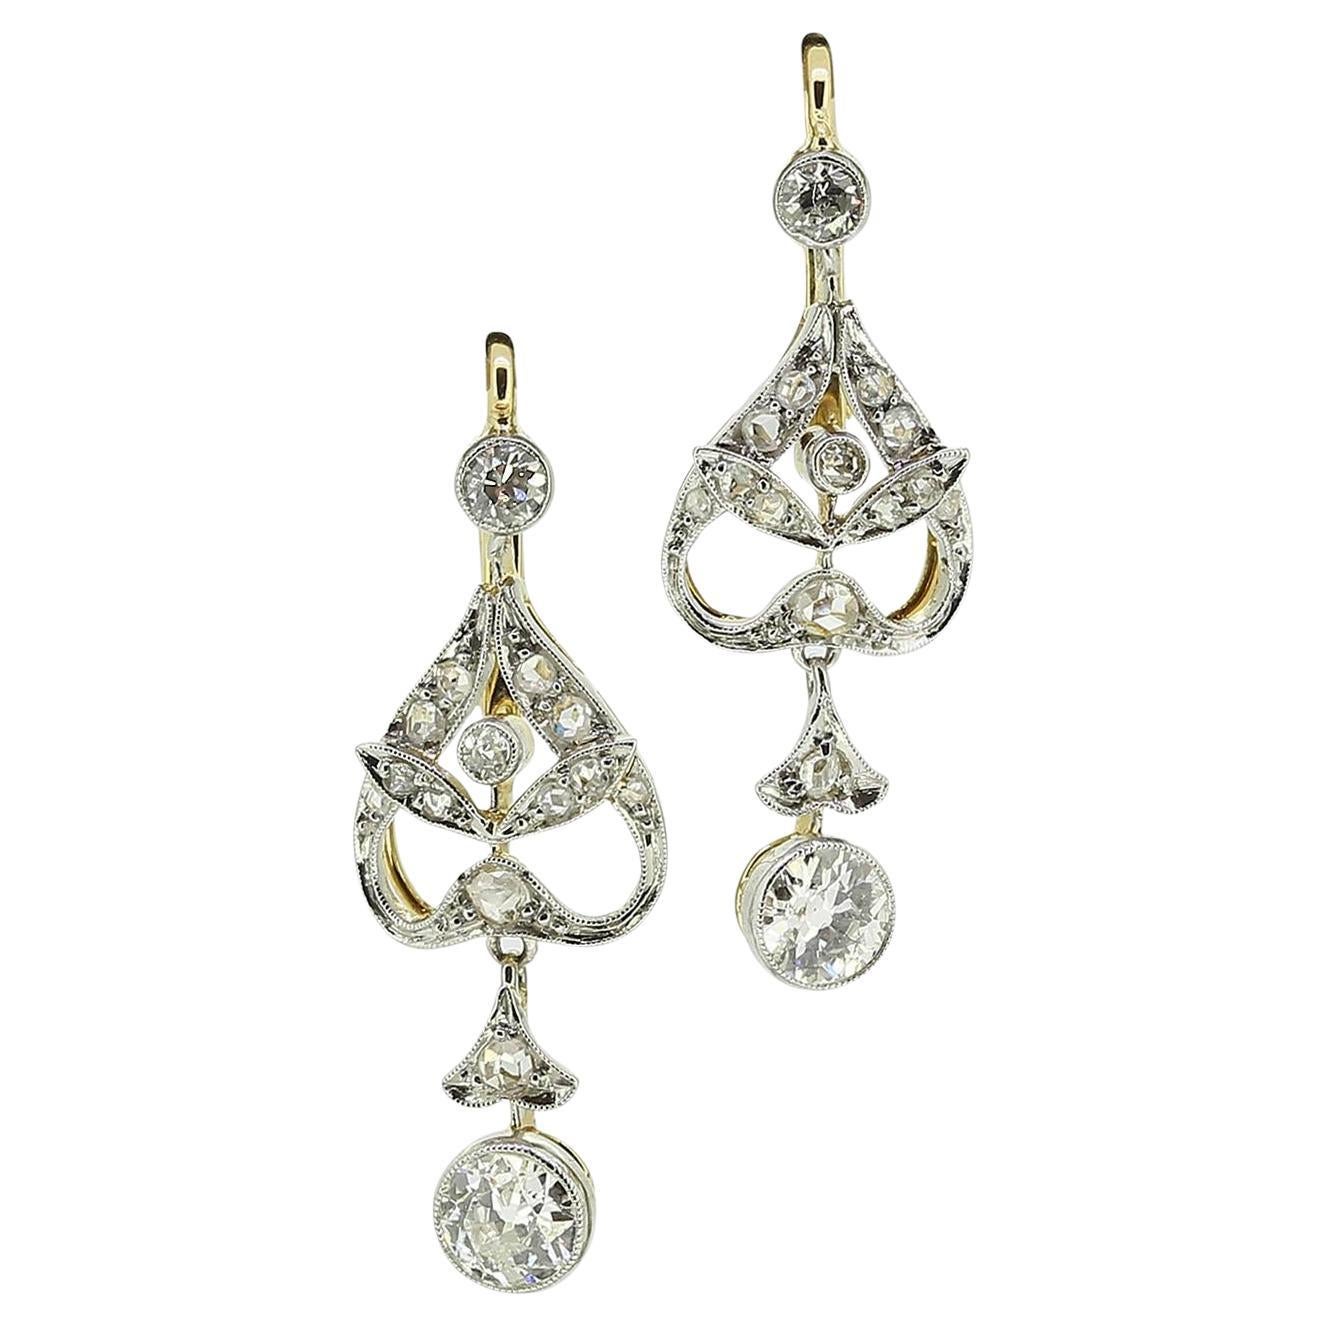 How much is a small diamond earring worth?